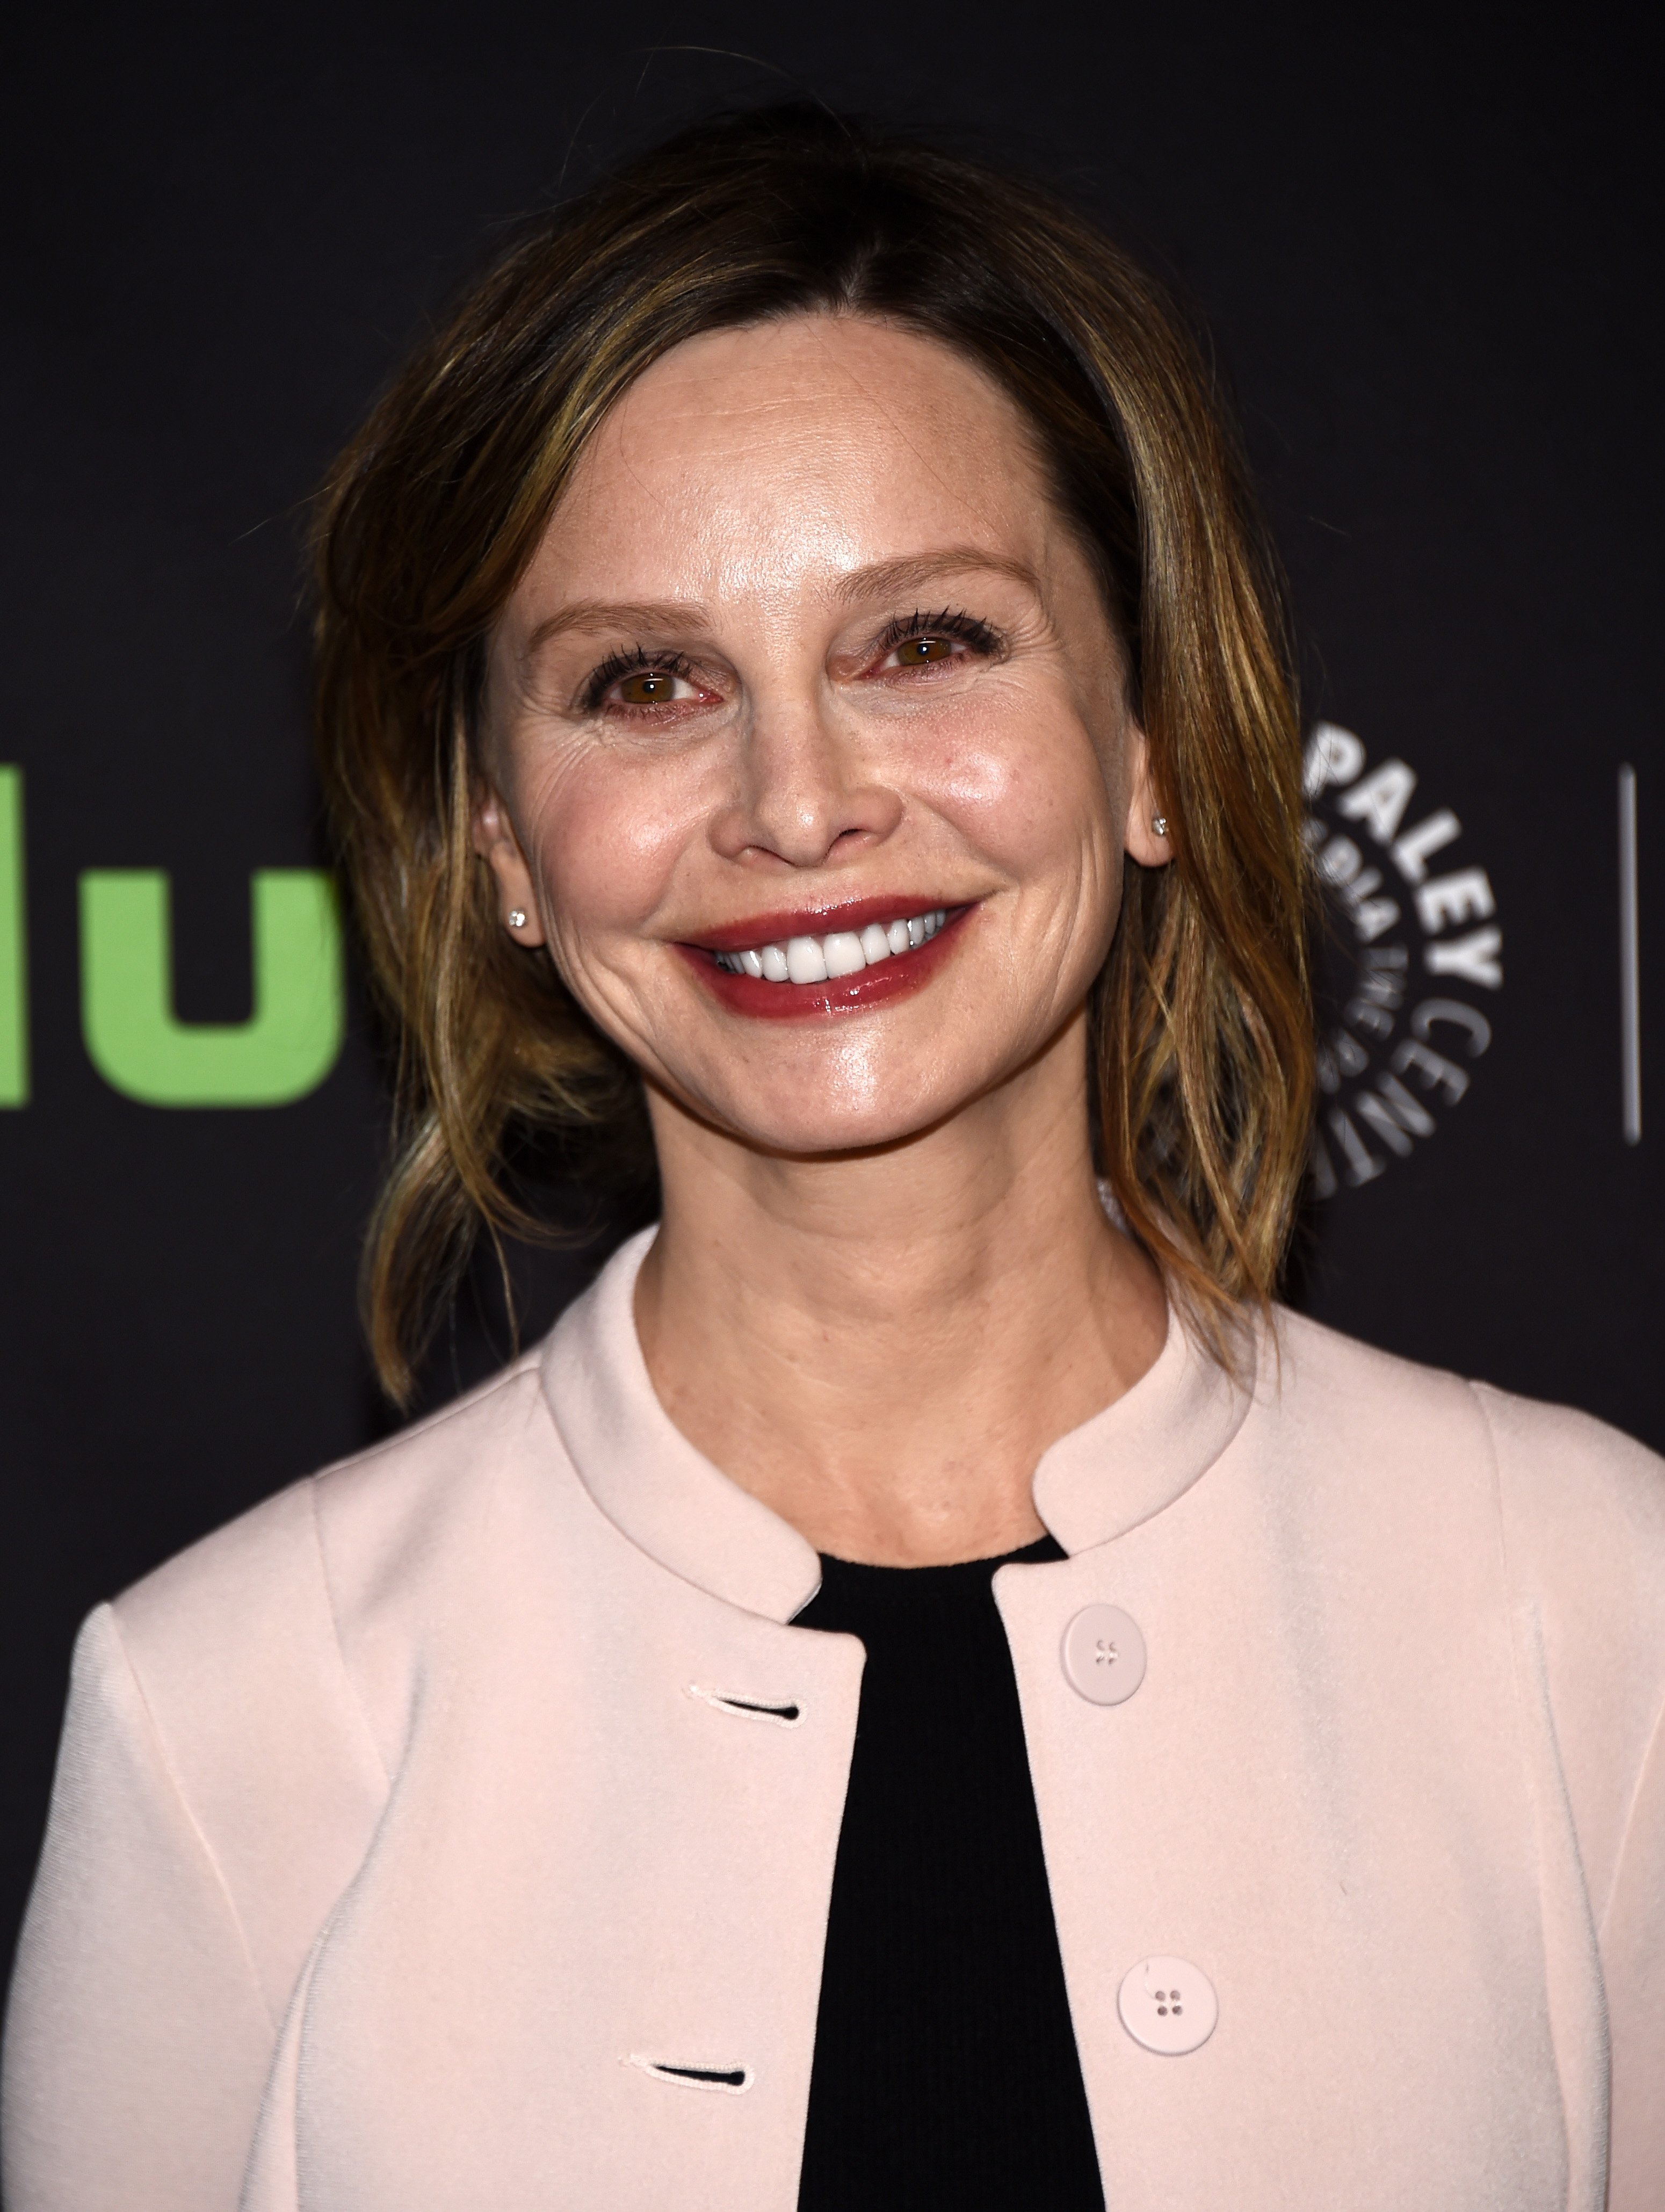 Calista Flockhart arrives at The Paley Center For Media's 33rd Annual PaleyFest Los Angeles presentation of "Supergirl" at the Dolby Theatre on March 13, 2016, in Hollywood, California | Source: Getty Images